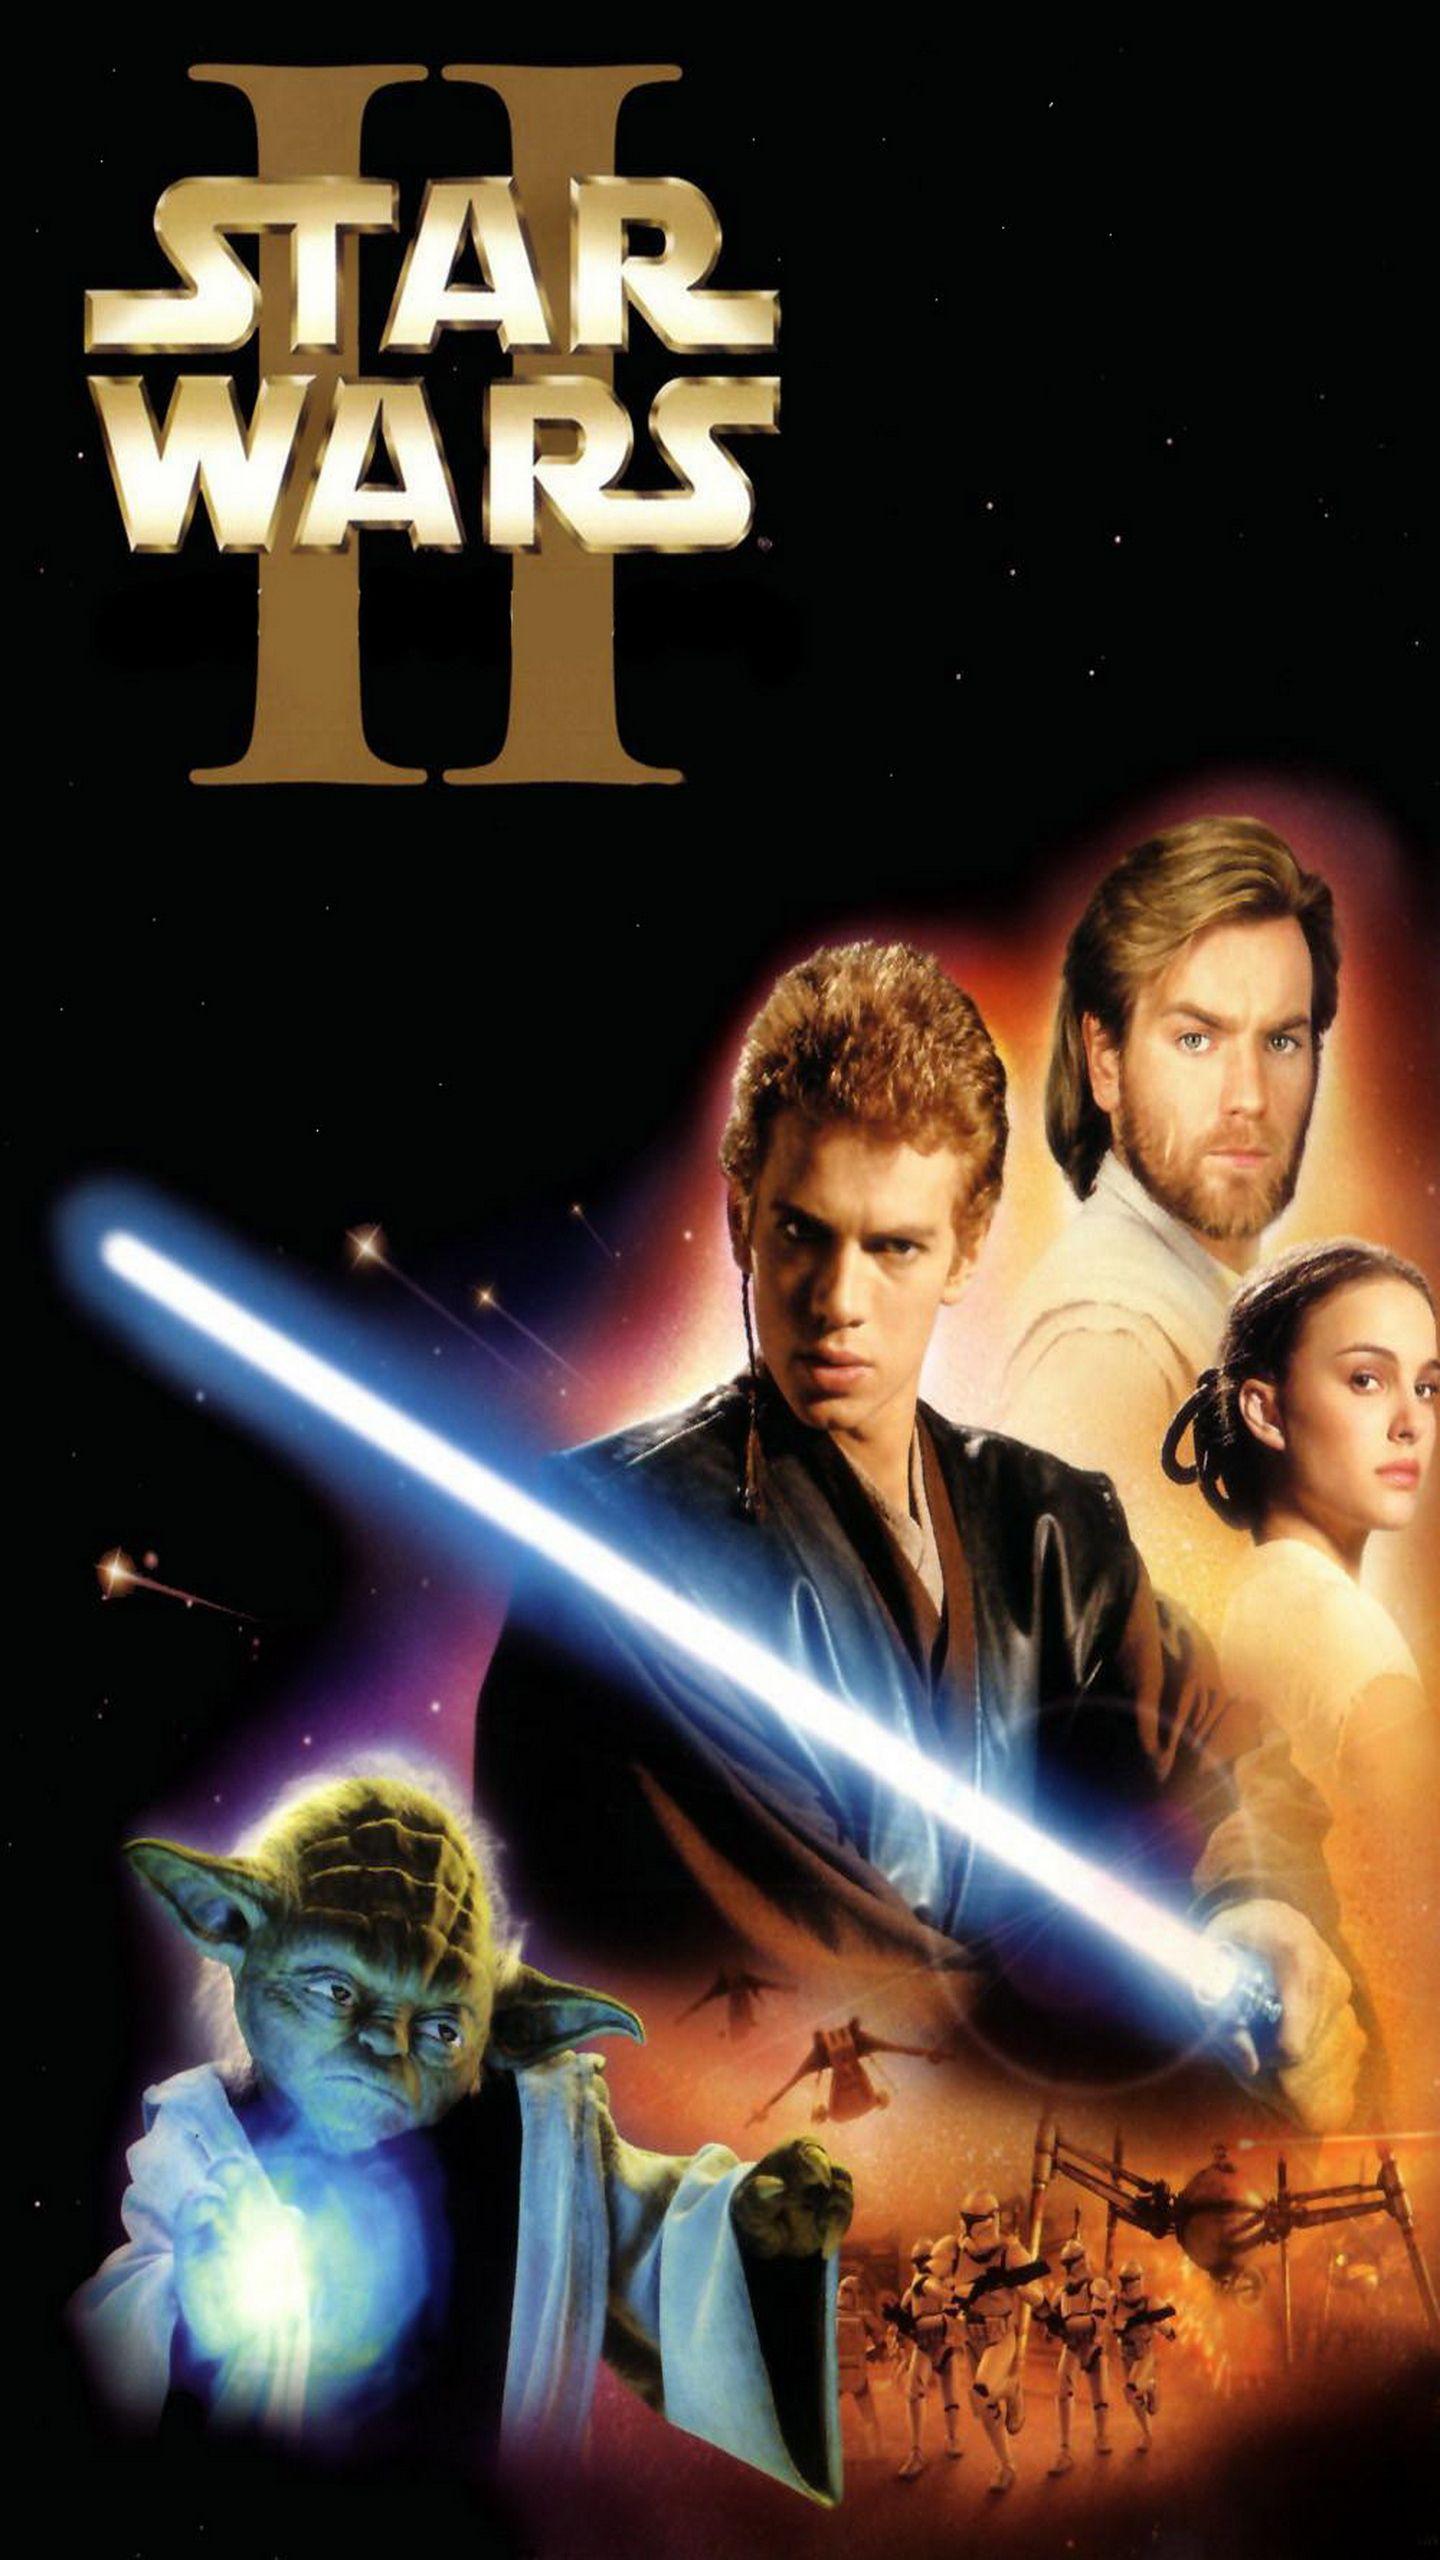 Star Wars Ep. III: Revenge of the Sith for ios download free